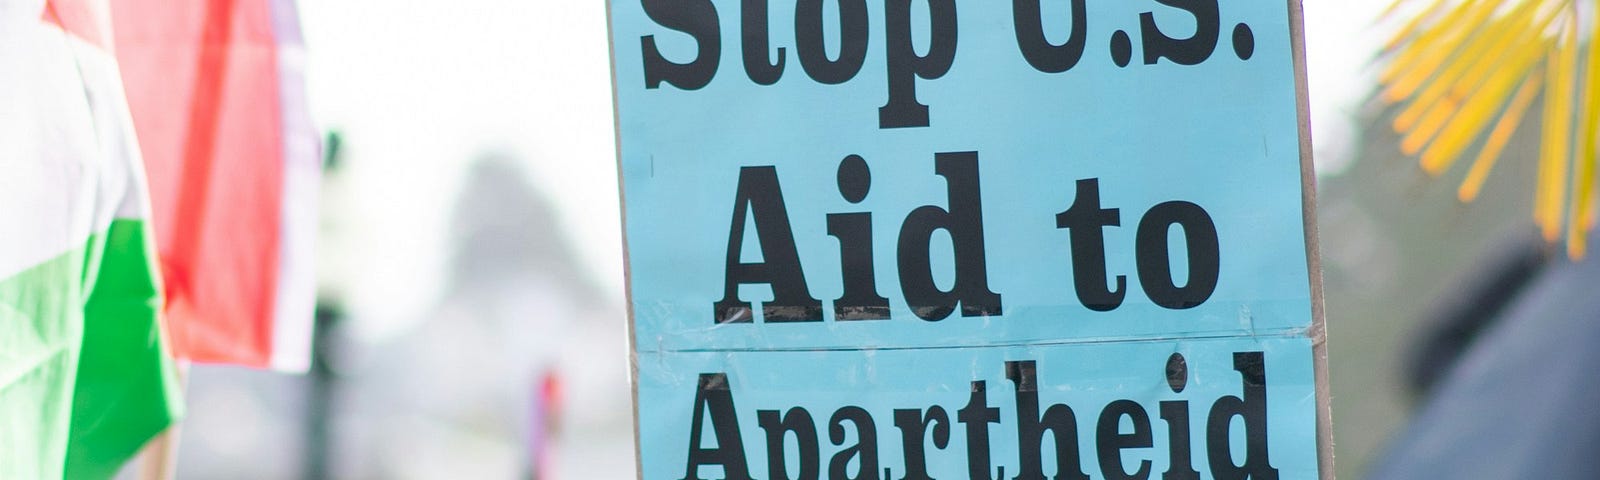 Protest sign “Stop U.S. Aid the Apartheid Israel